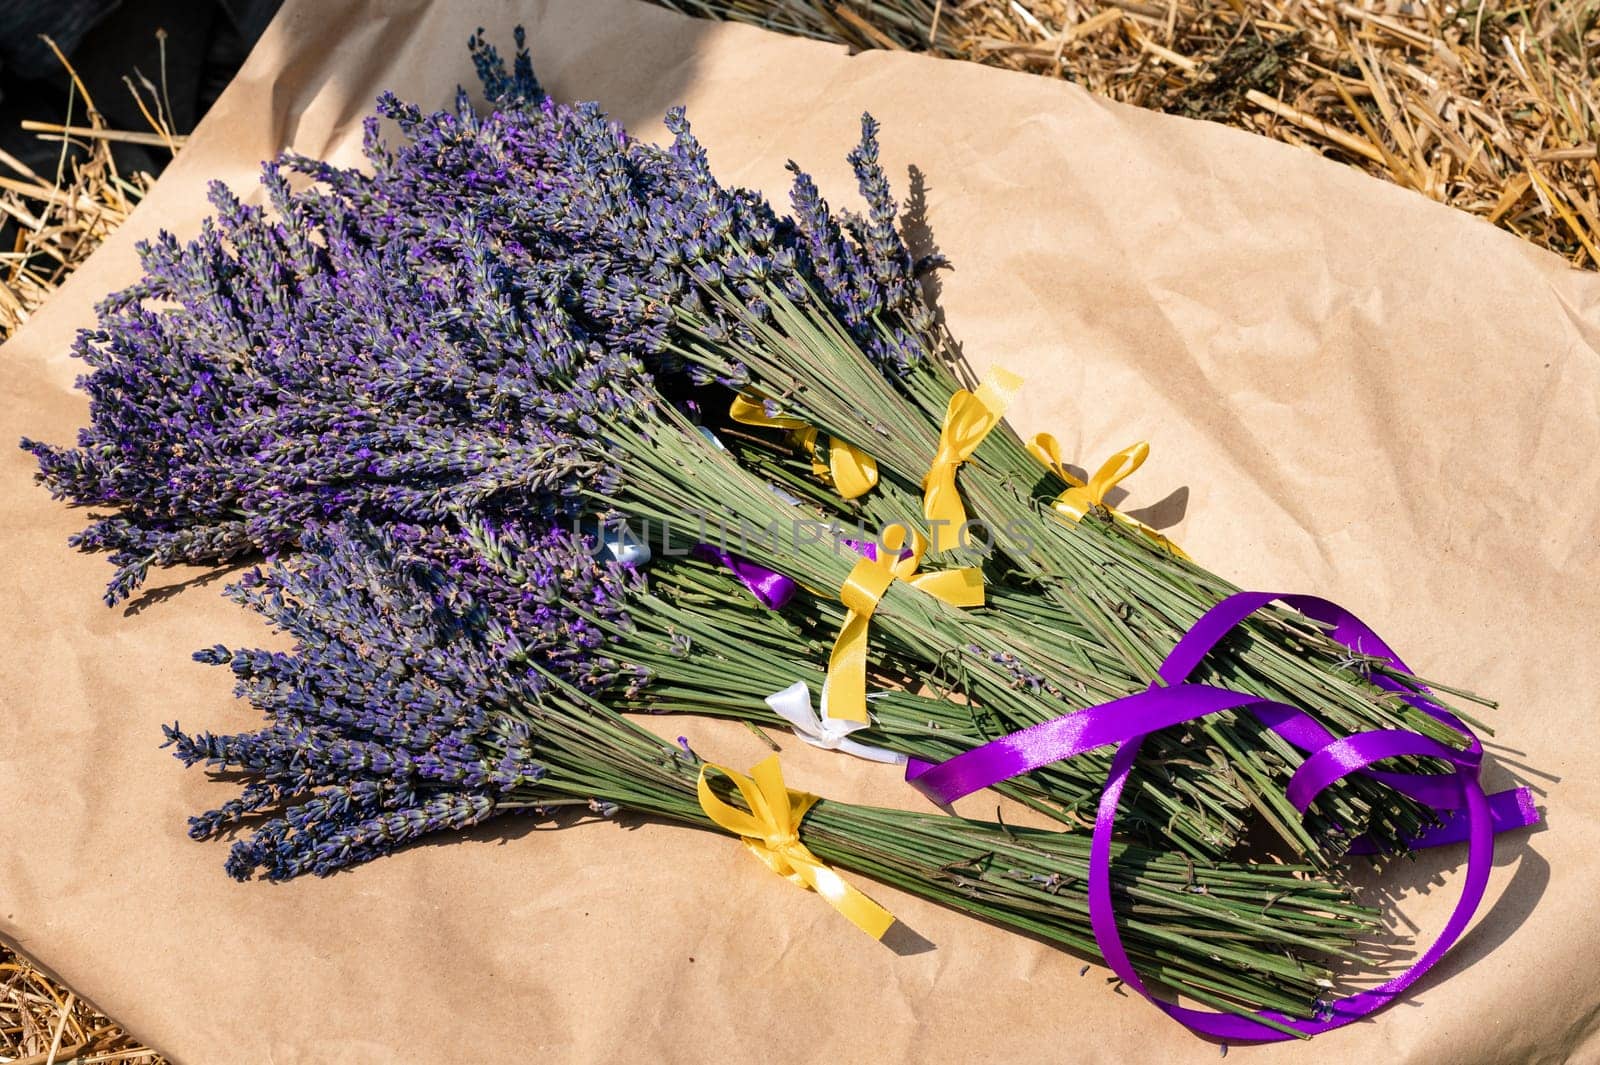 Lavender bouquets with purple and yellow ribbons lie on kraft paper